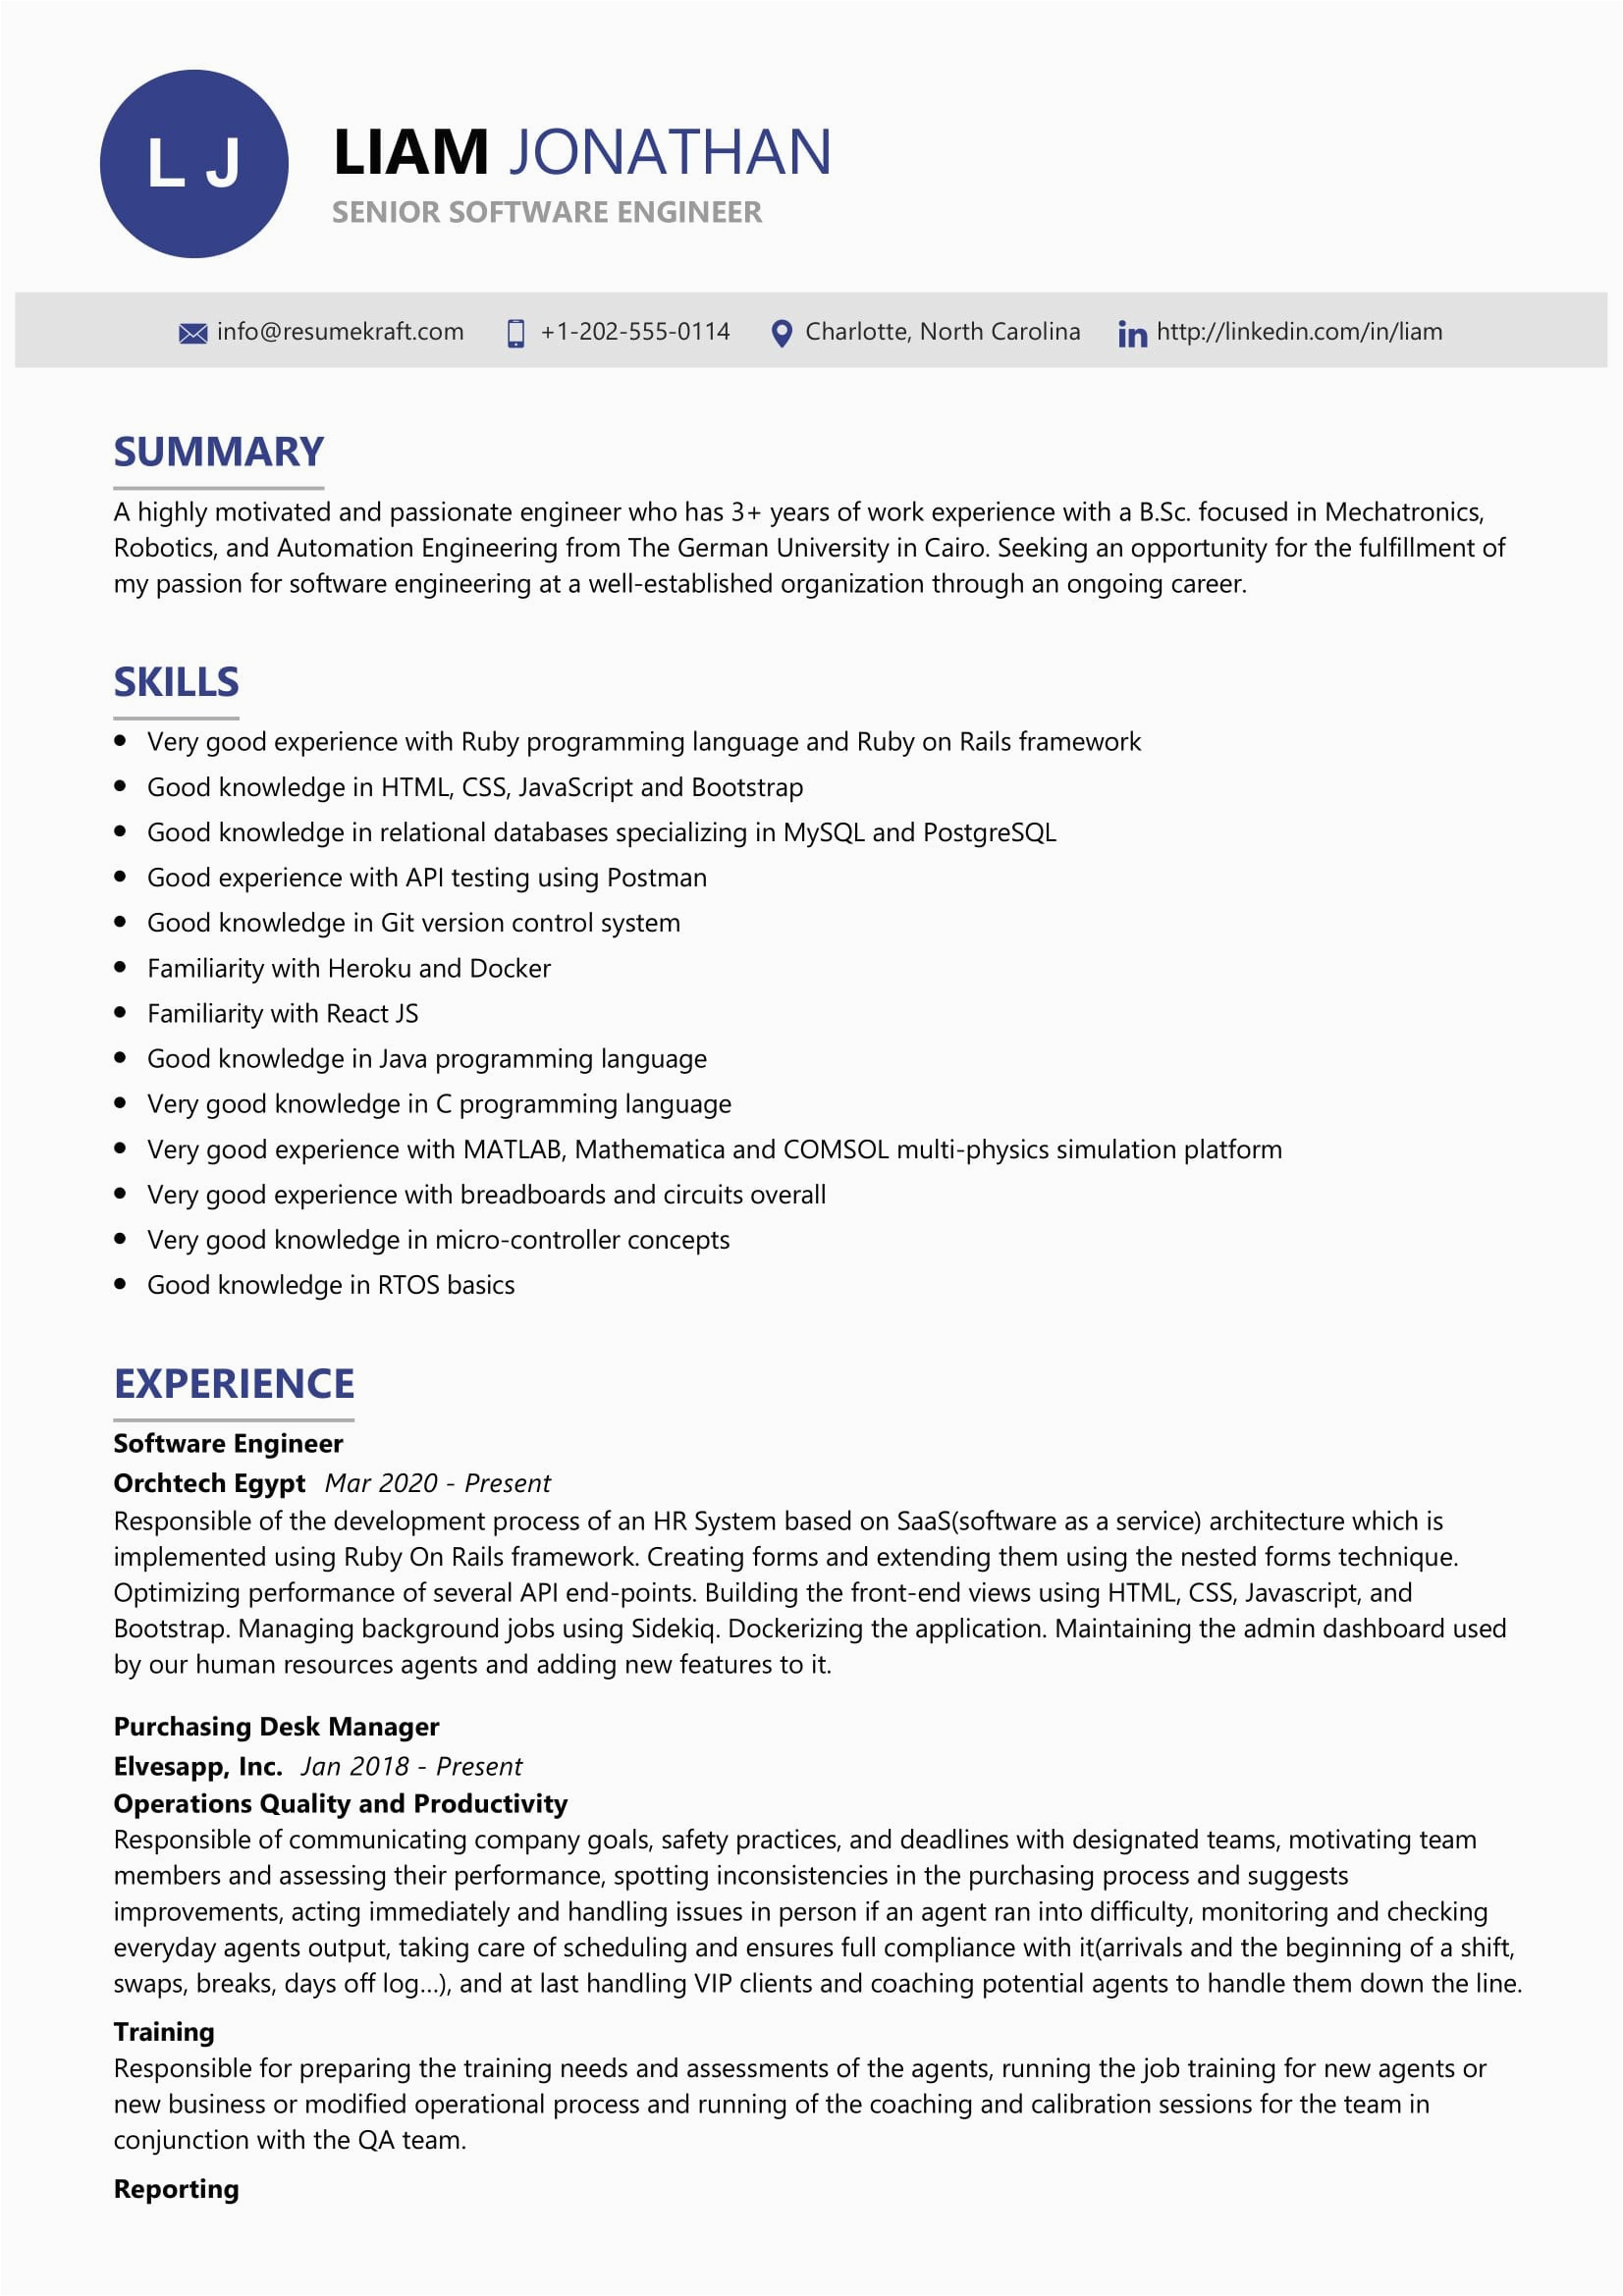 Sample Resume Templates for software Engineer Senior software Engineer Resume Sample Resumekraft